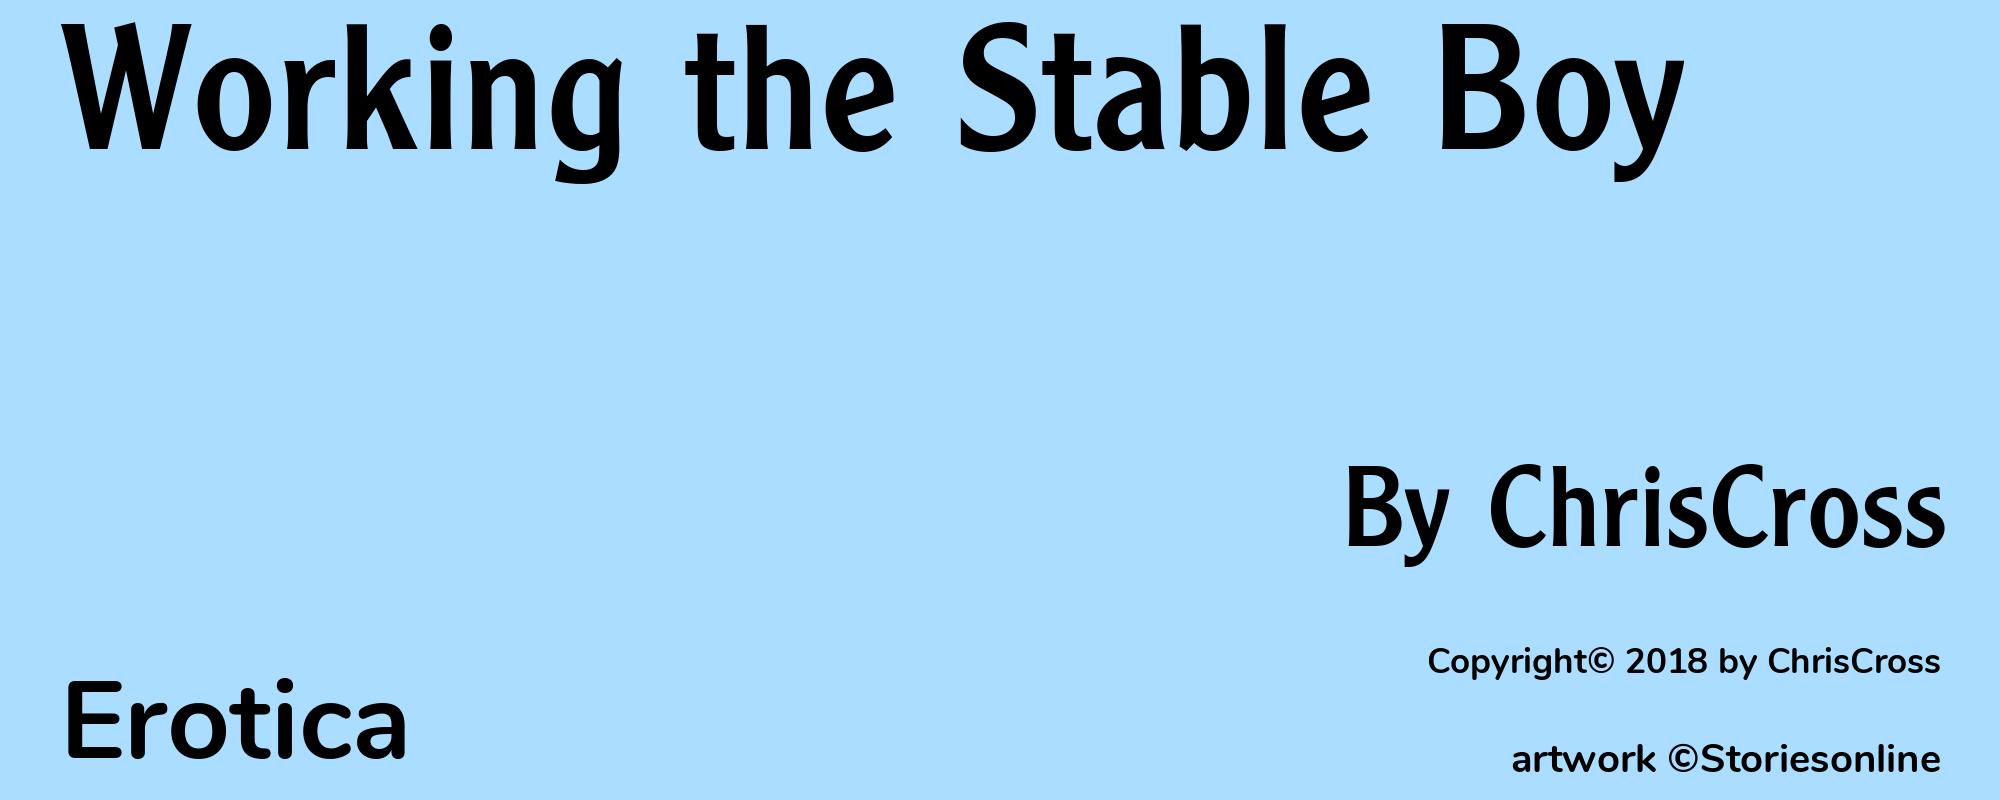 Working the Stable Boy - Cover